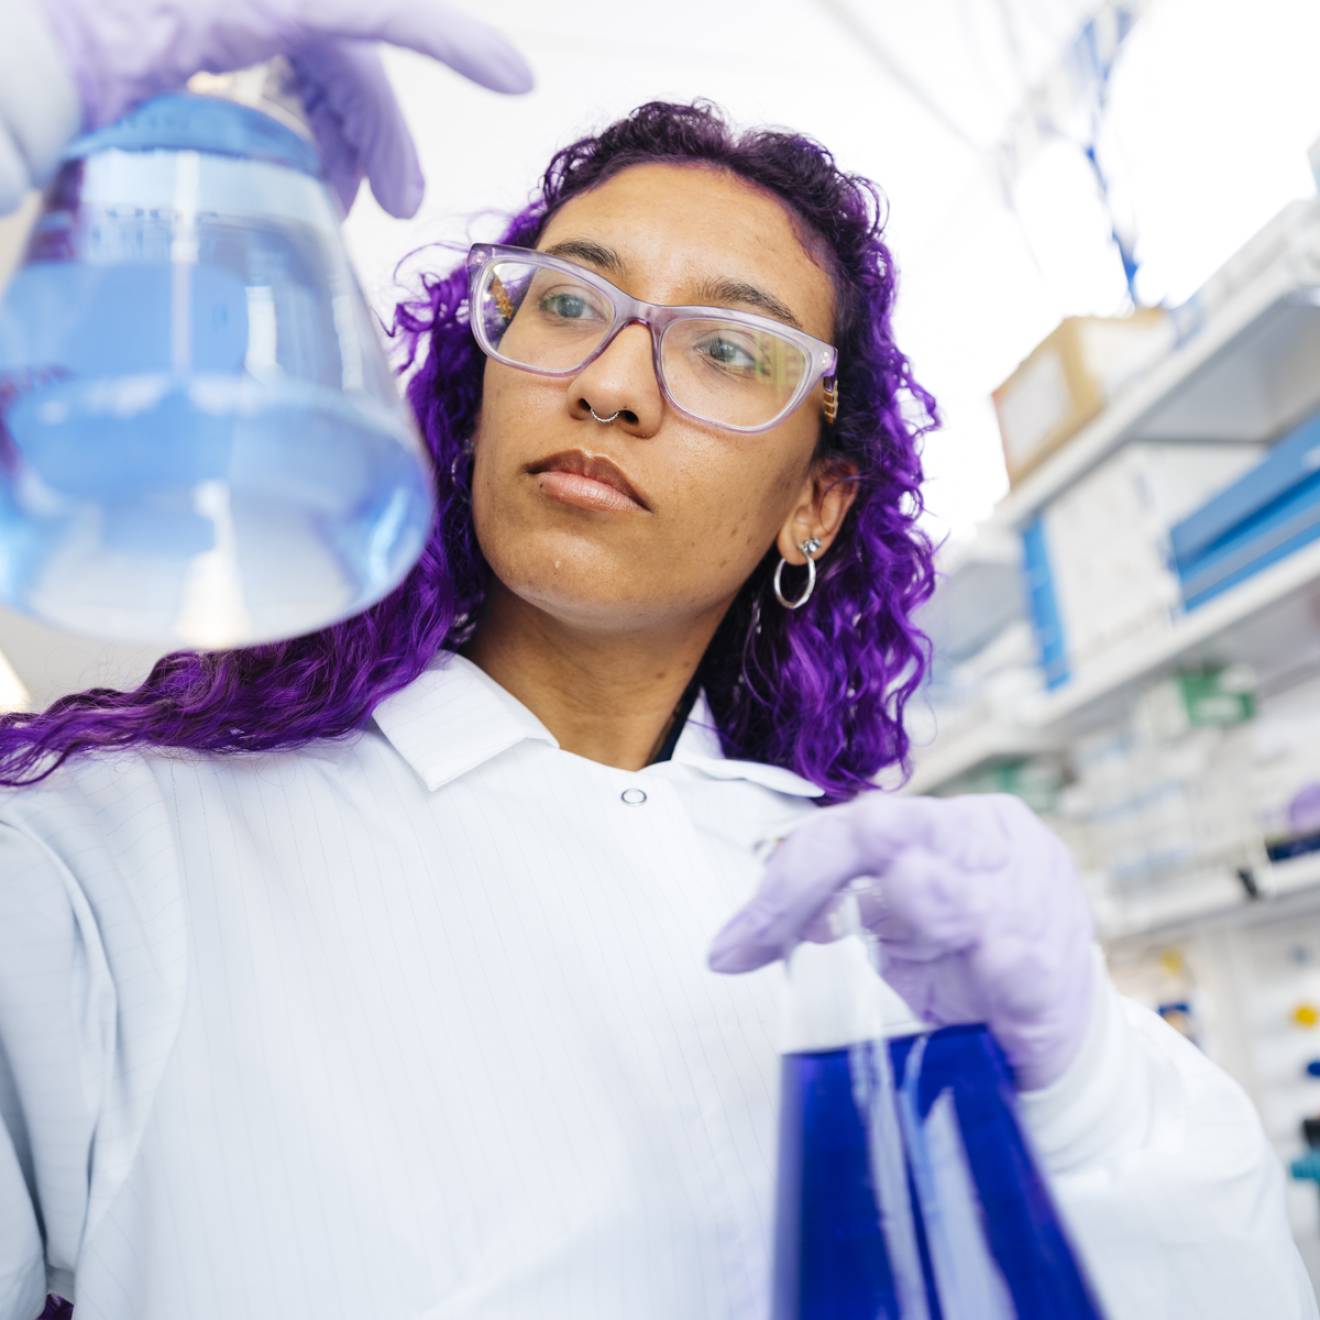 Woman with long, dyed-purple hair wearing a white lab coat and protective gear compares two flasks full of colorful liquid in a lab